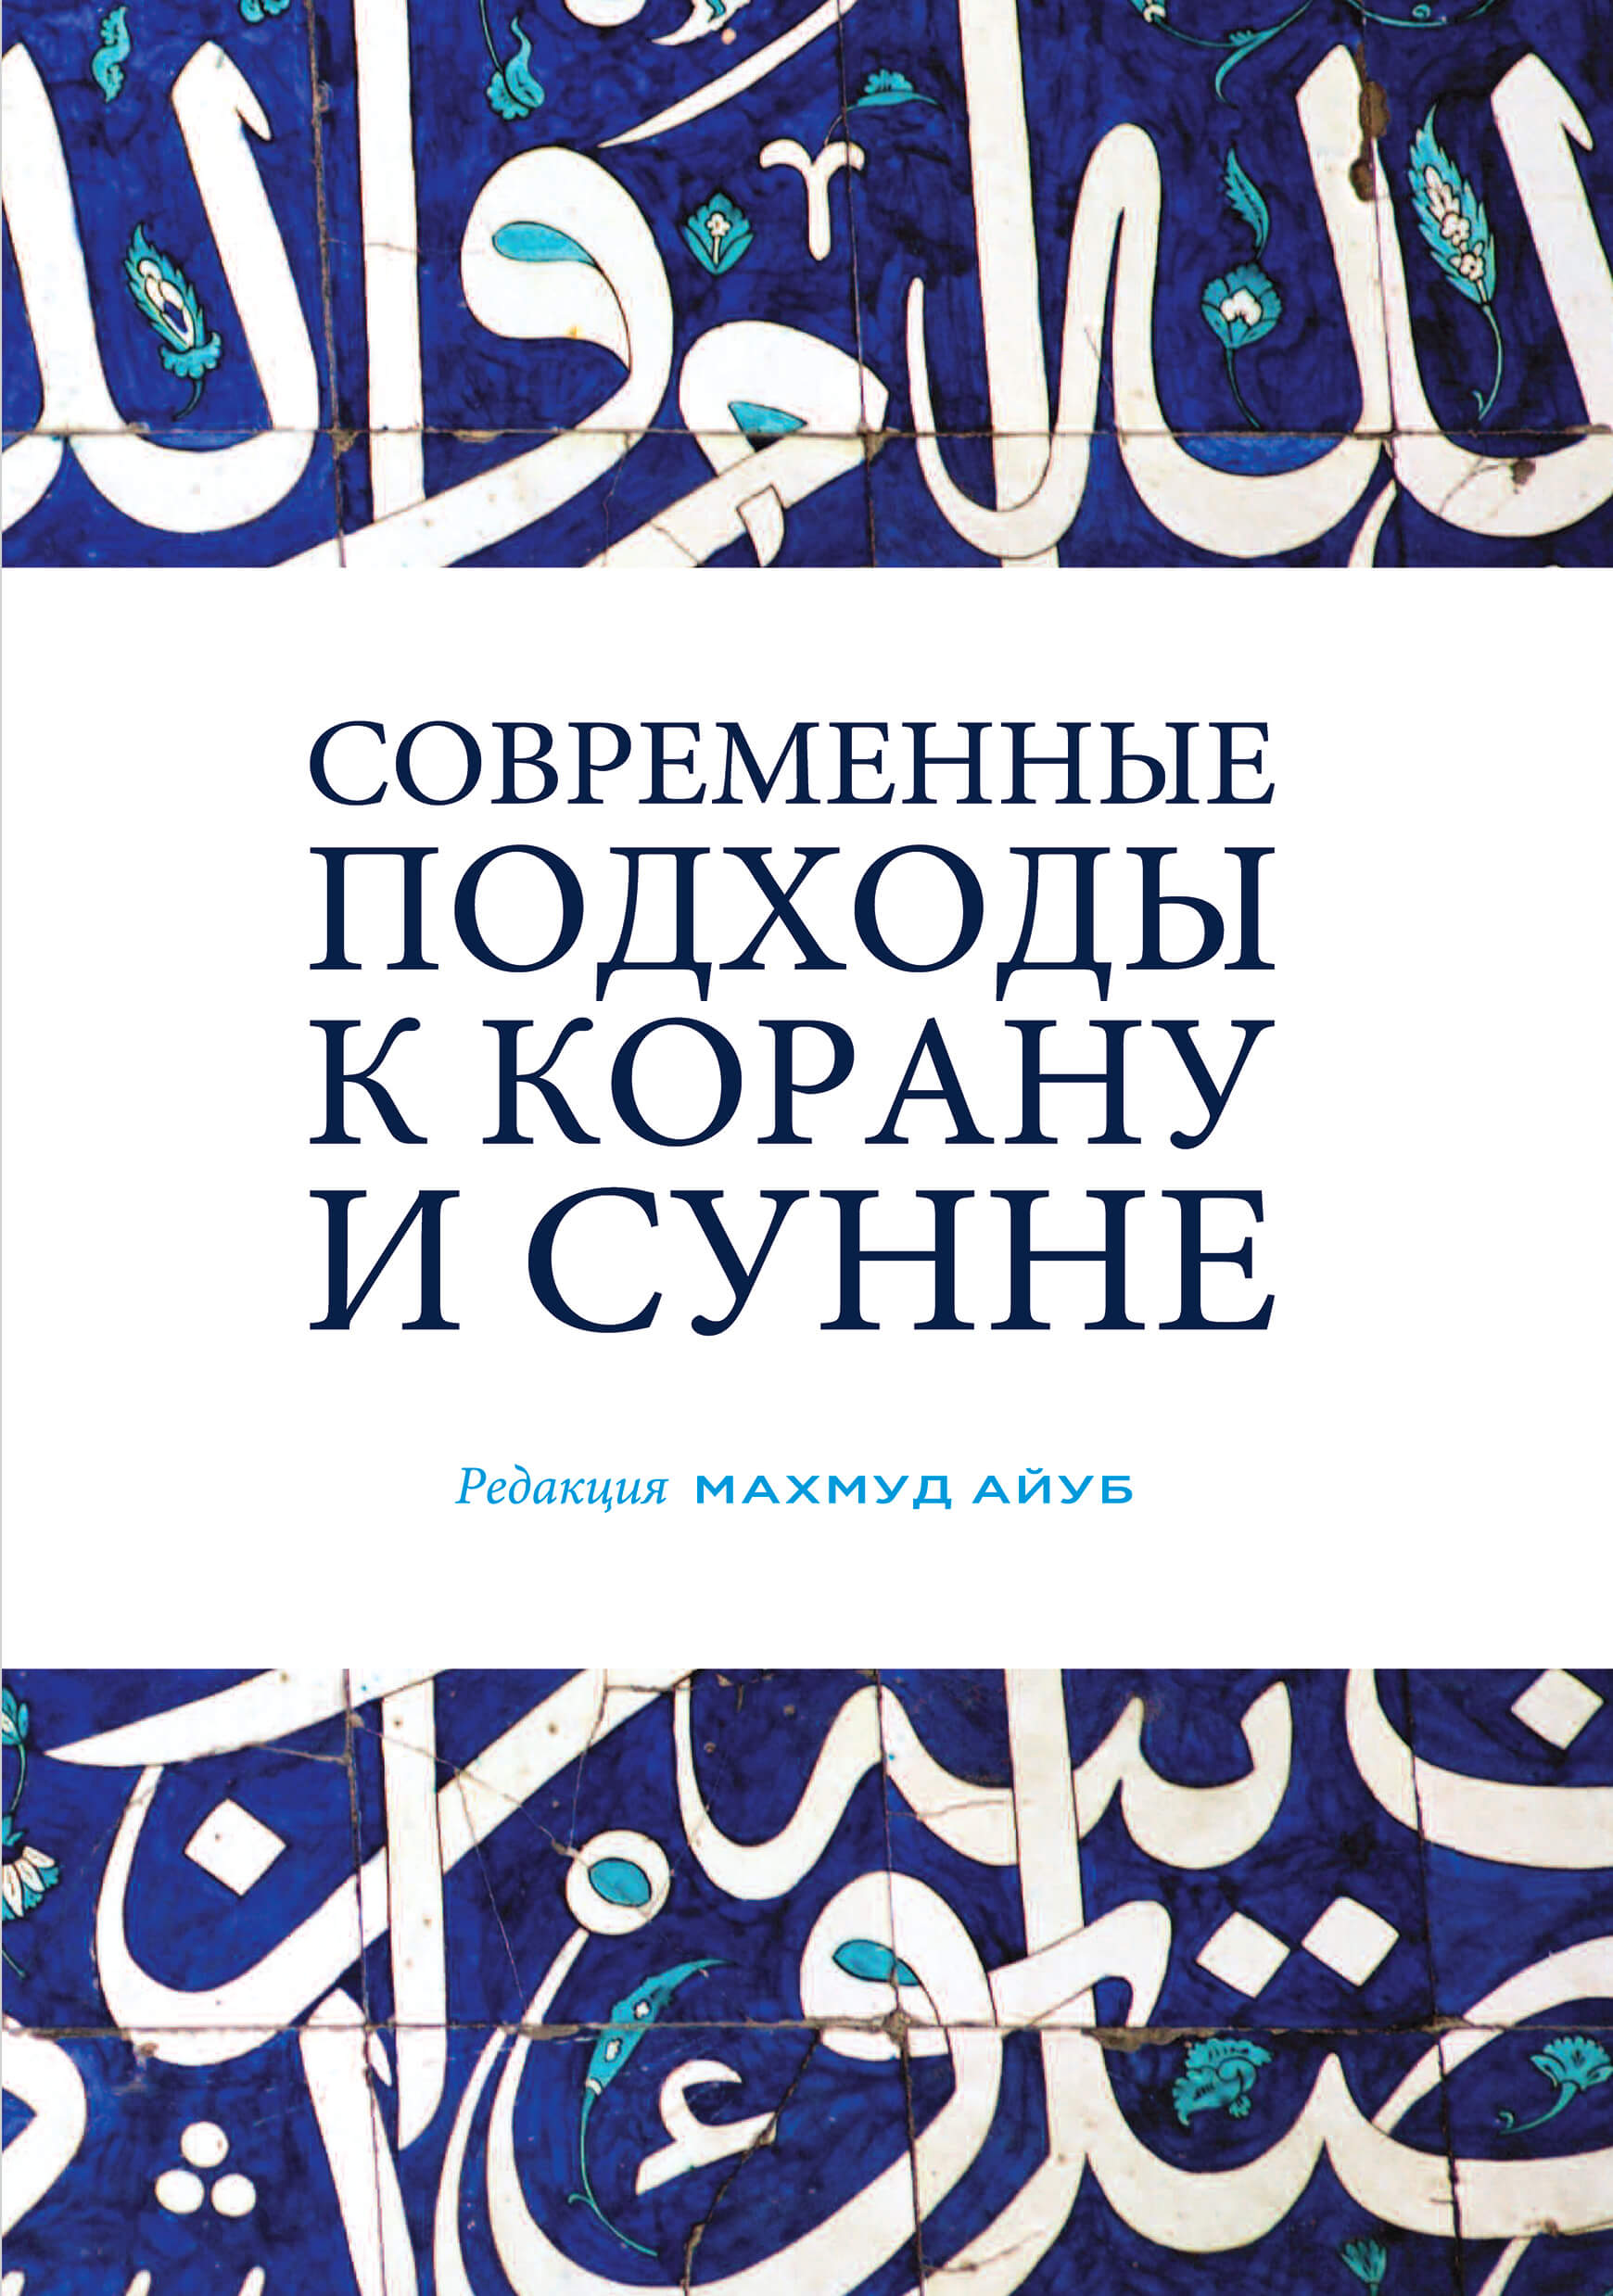 Russian: Современные подходы к Корану и Сунне (Contemporary Approaches to the Qur’an and Sunnah)